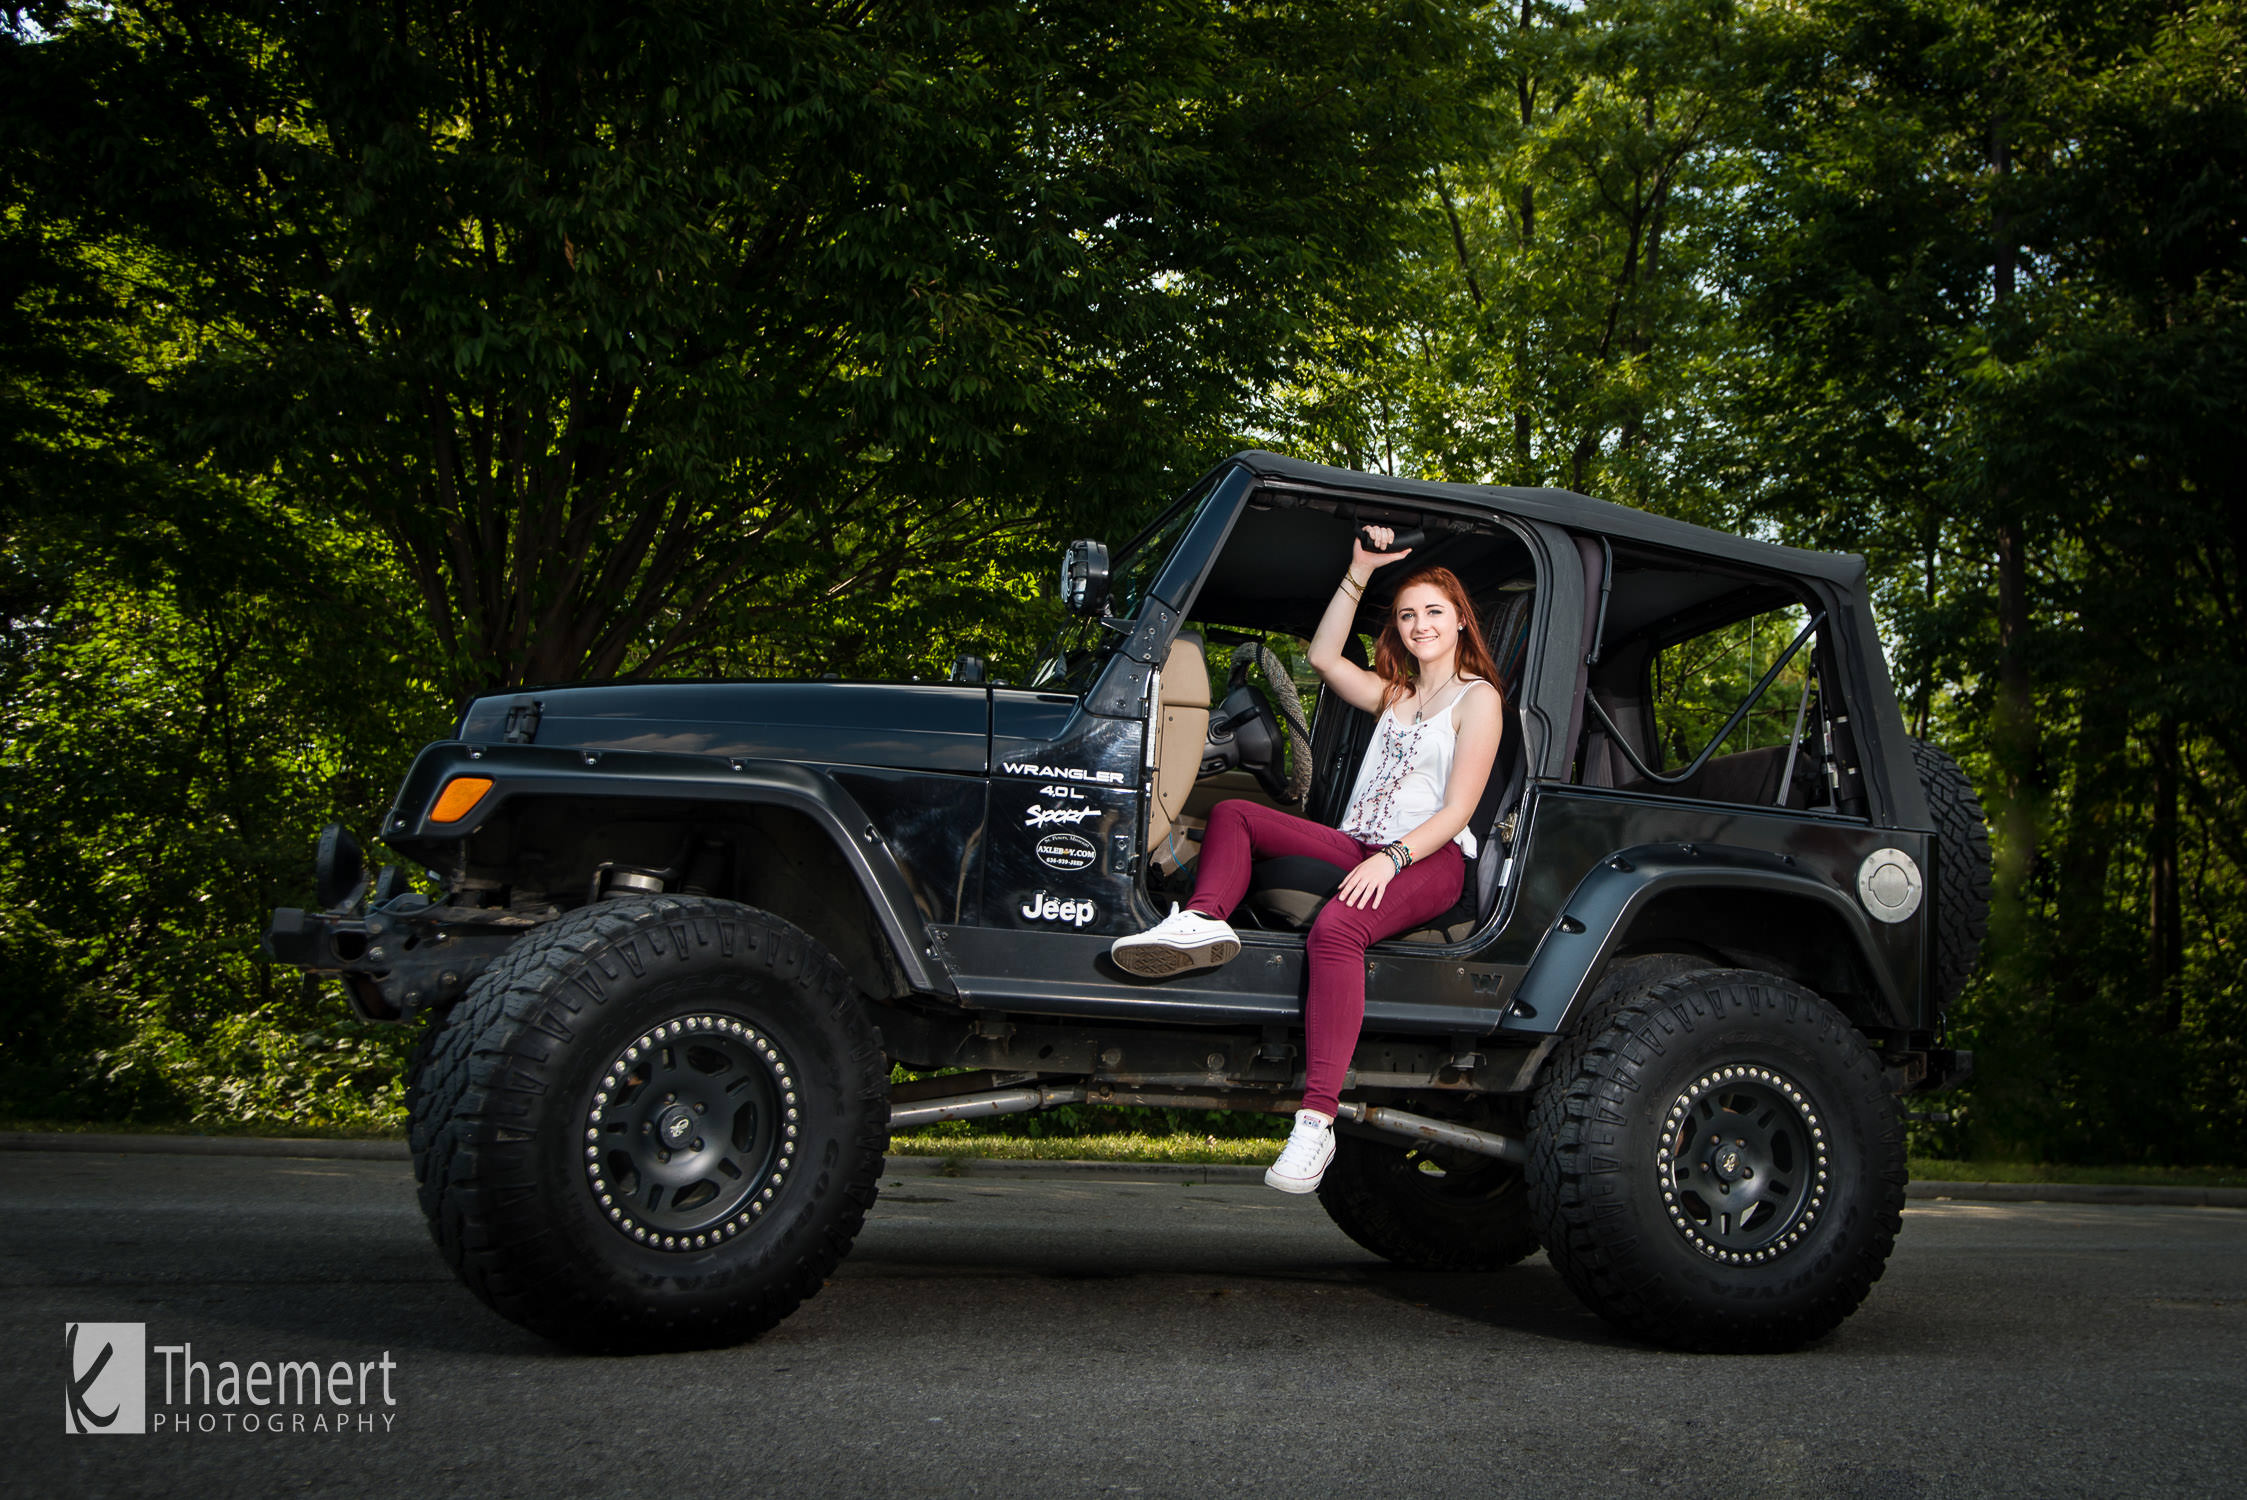 High School Senior with her Jeep